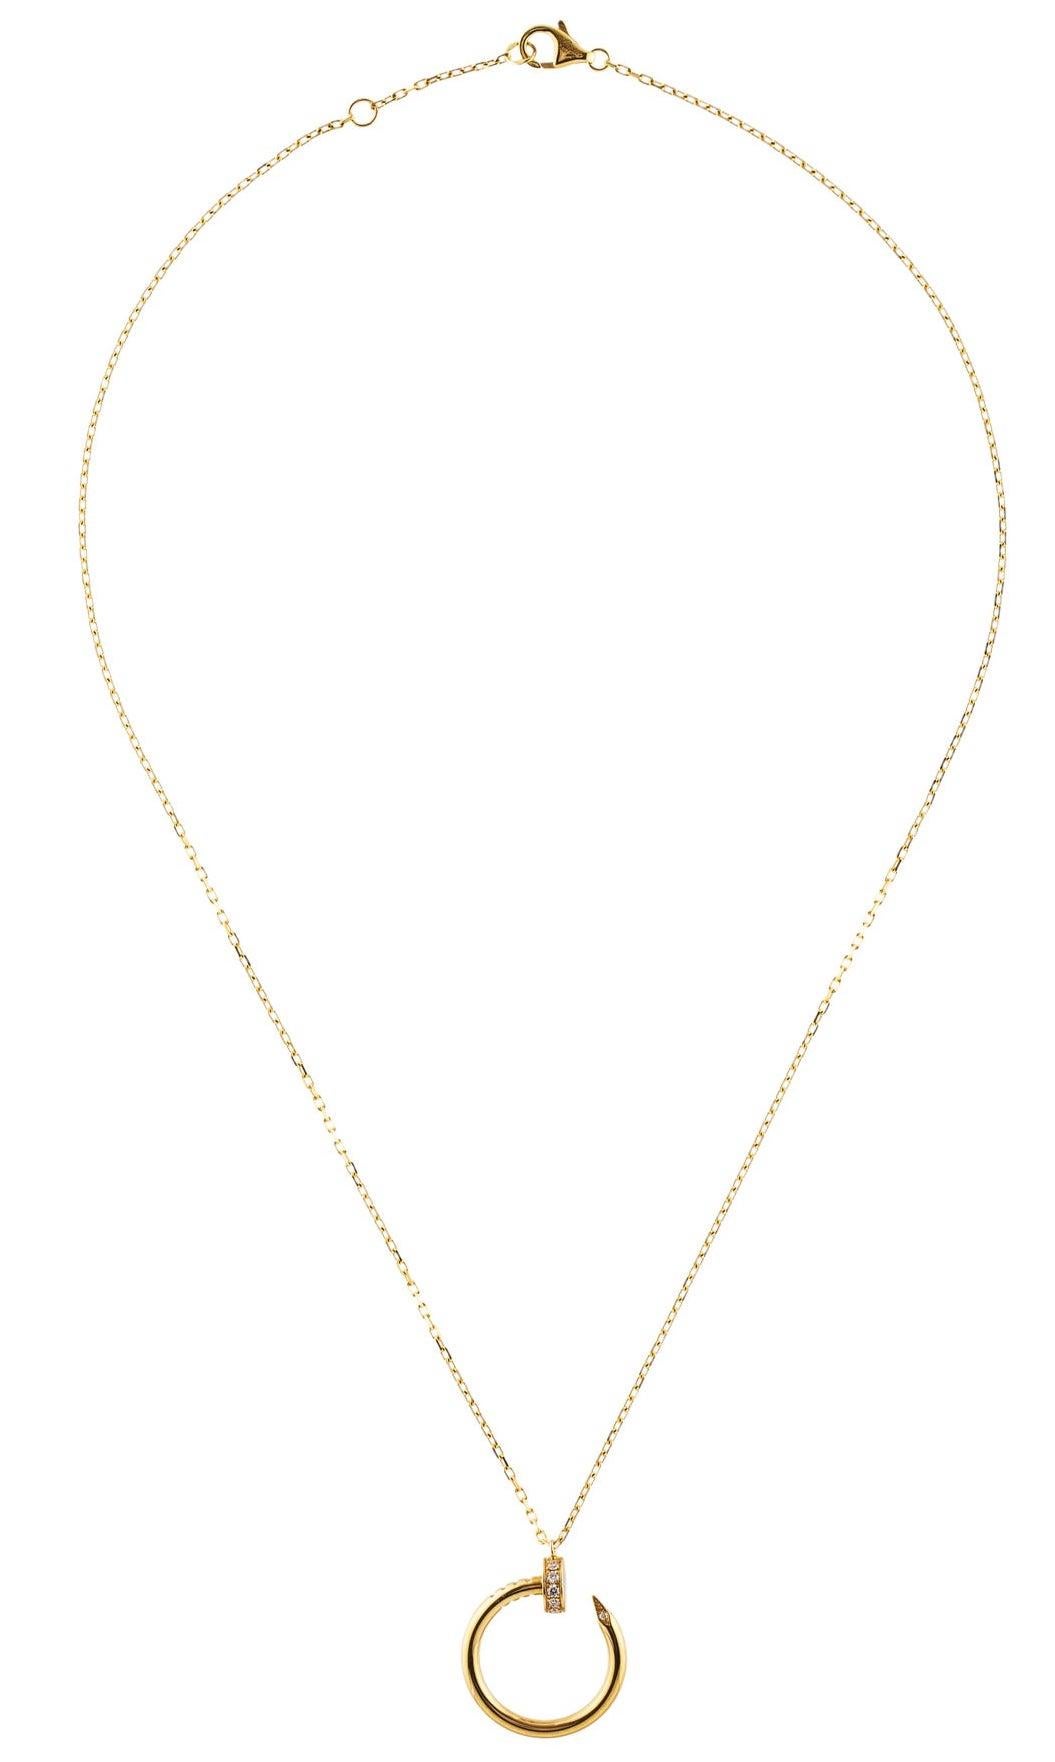 An authentic Cartier Juste un Clou necklace made in 18K yellow gold, set with 14 brilliant-cut diamonds totaling 0.12 carats. This necklace is 16 inches long. The nail pendant is .75 inches in diameter. The clasp is hallmarked Cartier AU750. Bid